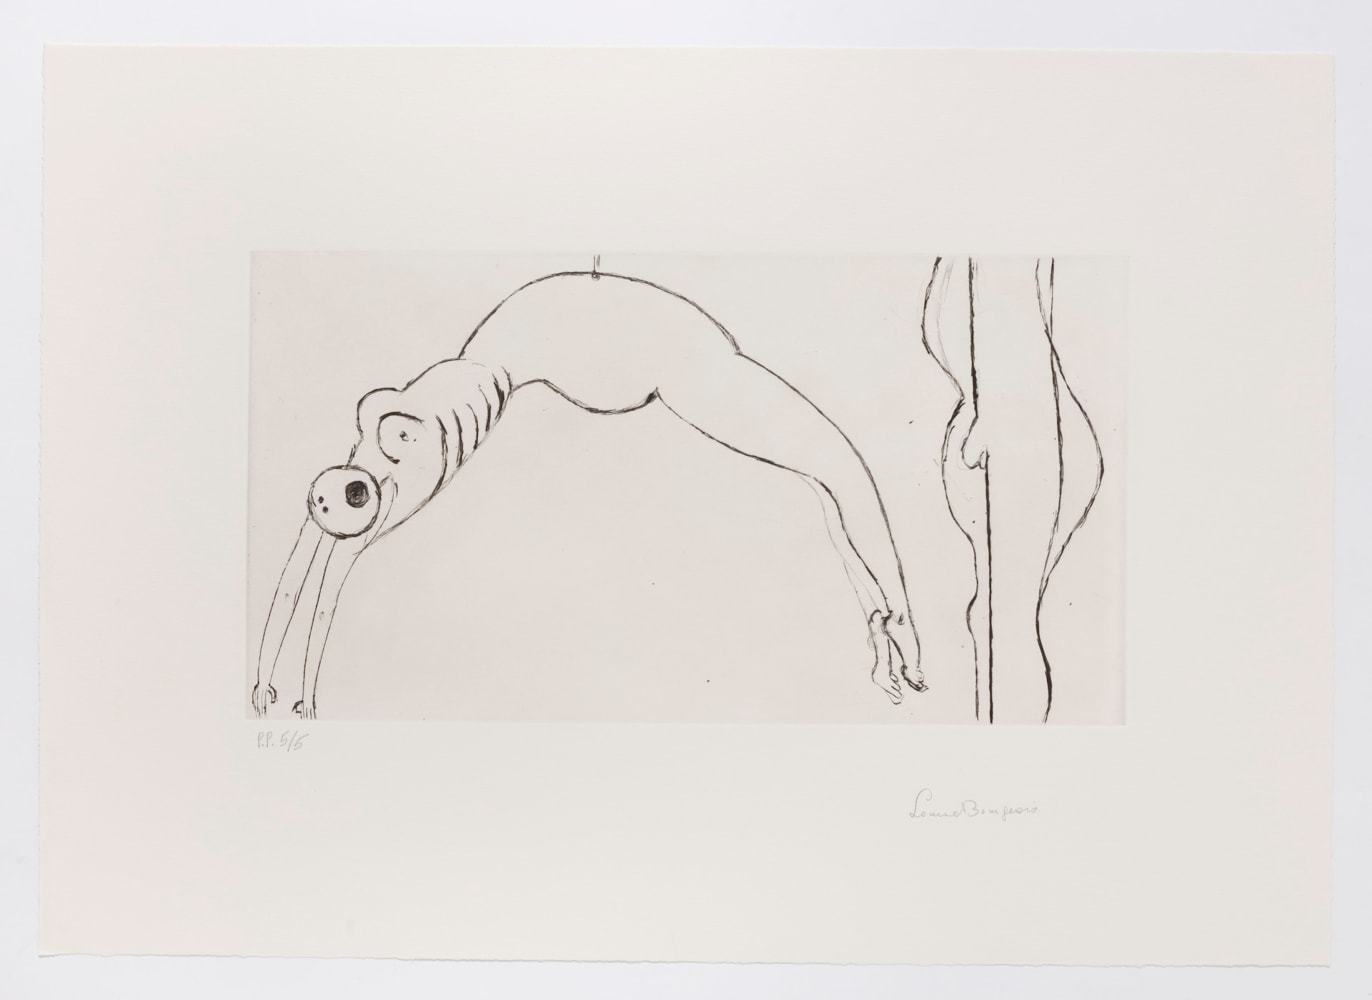 Louise Bourgeois

Arched Figure, 1993
drypoint, ed. of 50
15 5/8 x 22 in. / 39.7 x 55.9 cm